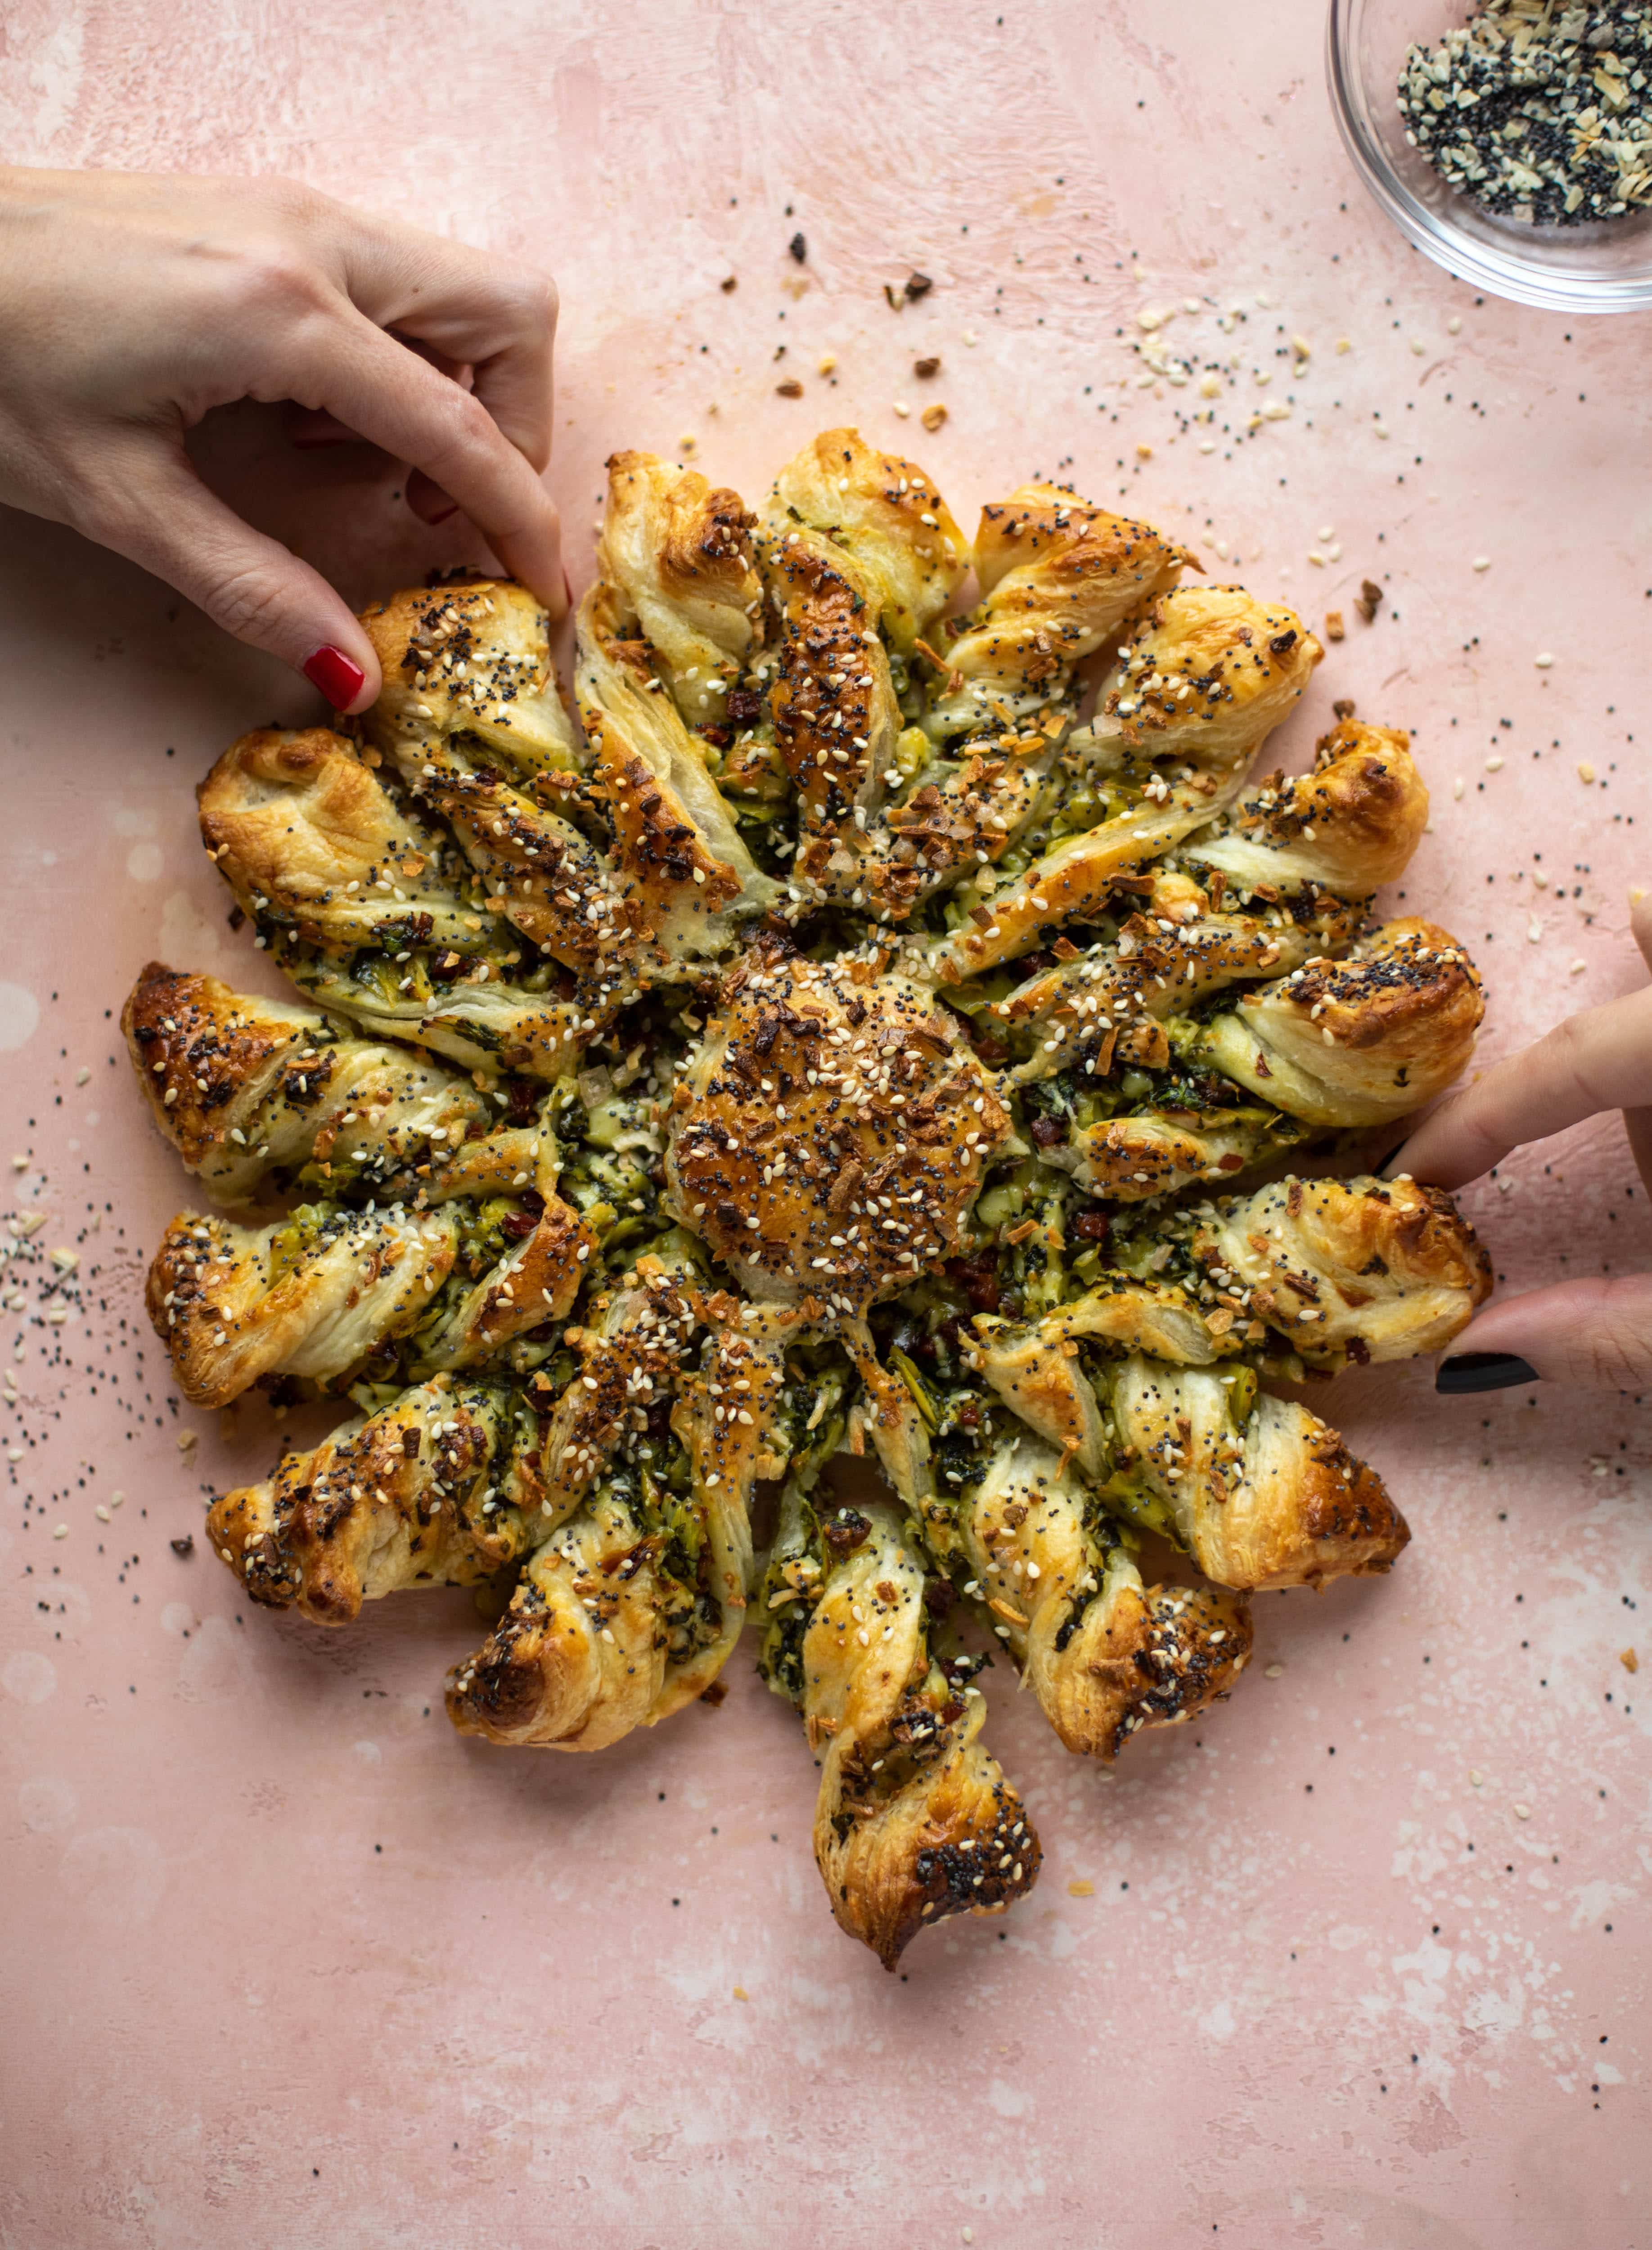 25 recipes to make for new year's eve!